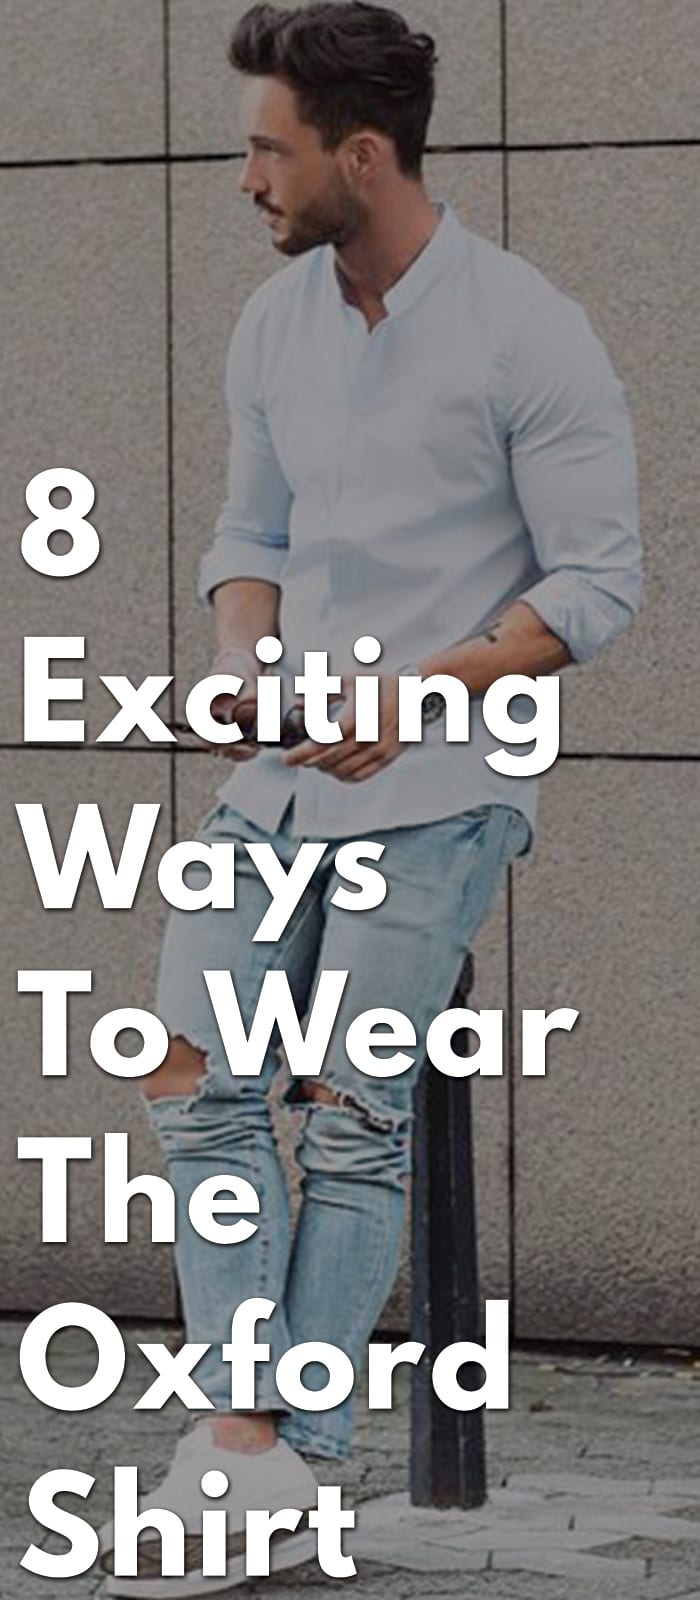 8-Exciting-Ways-To-Wear-The-Oxford-Shirt